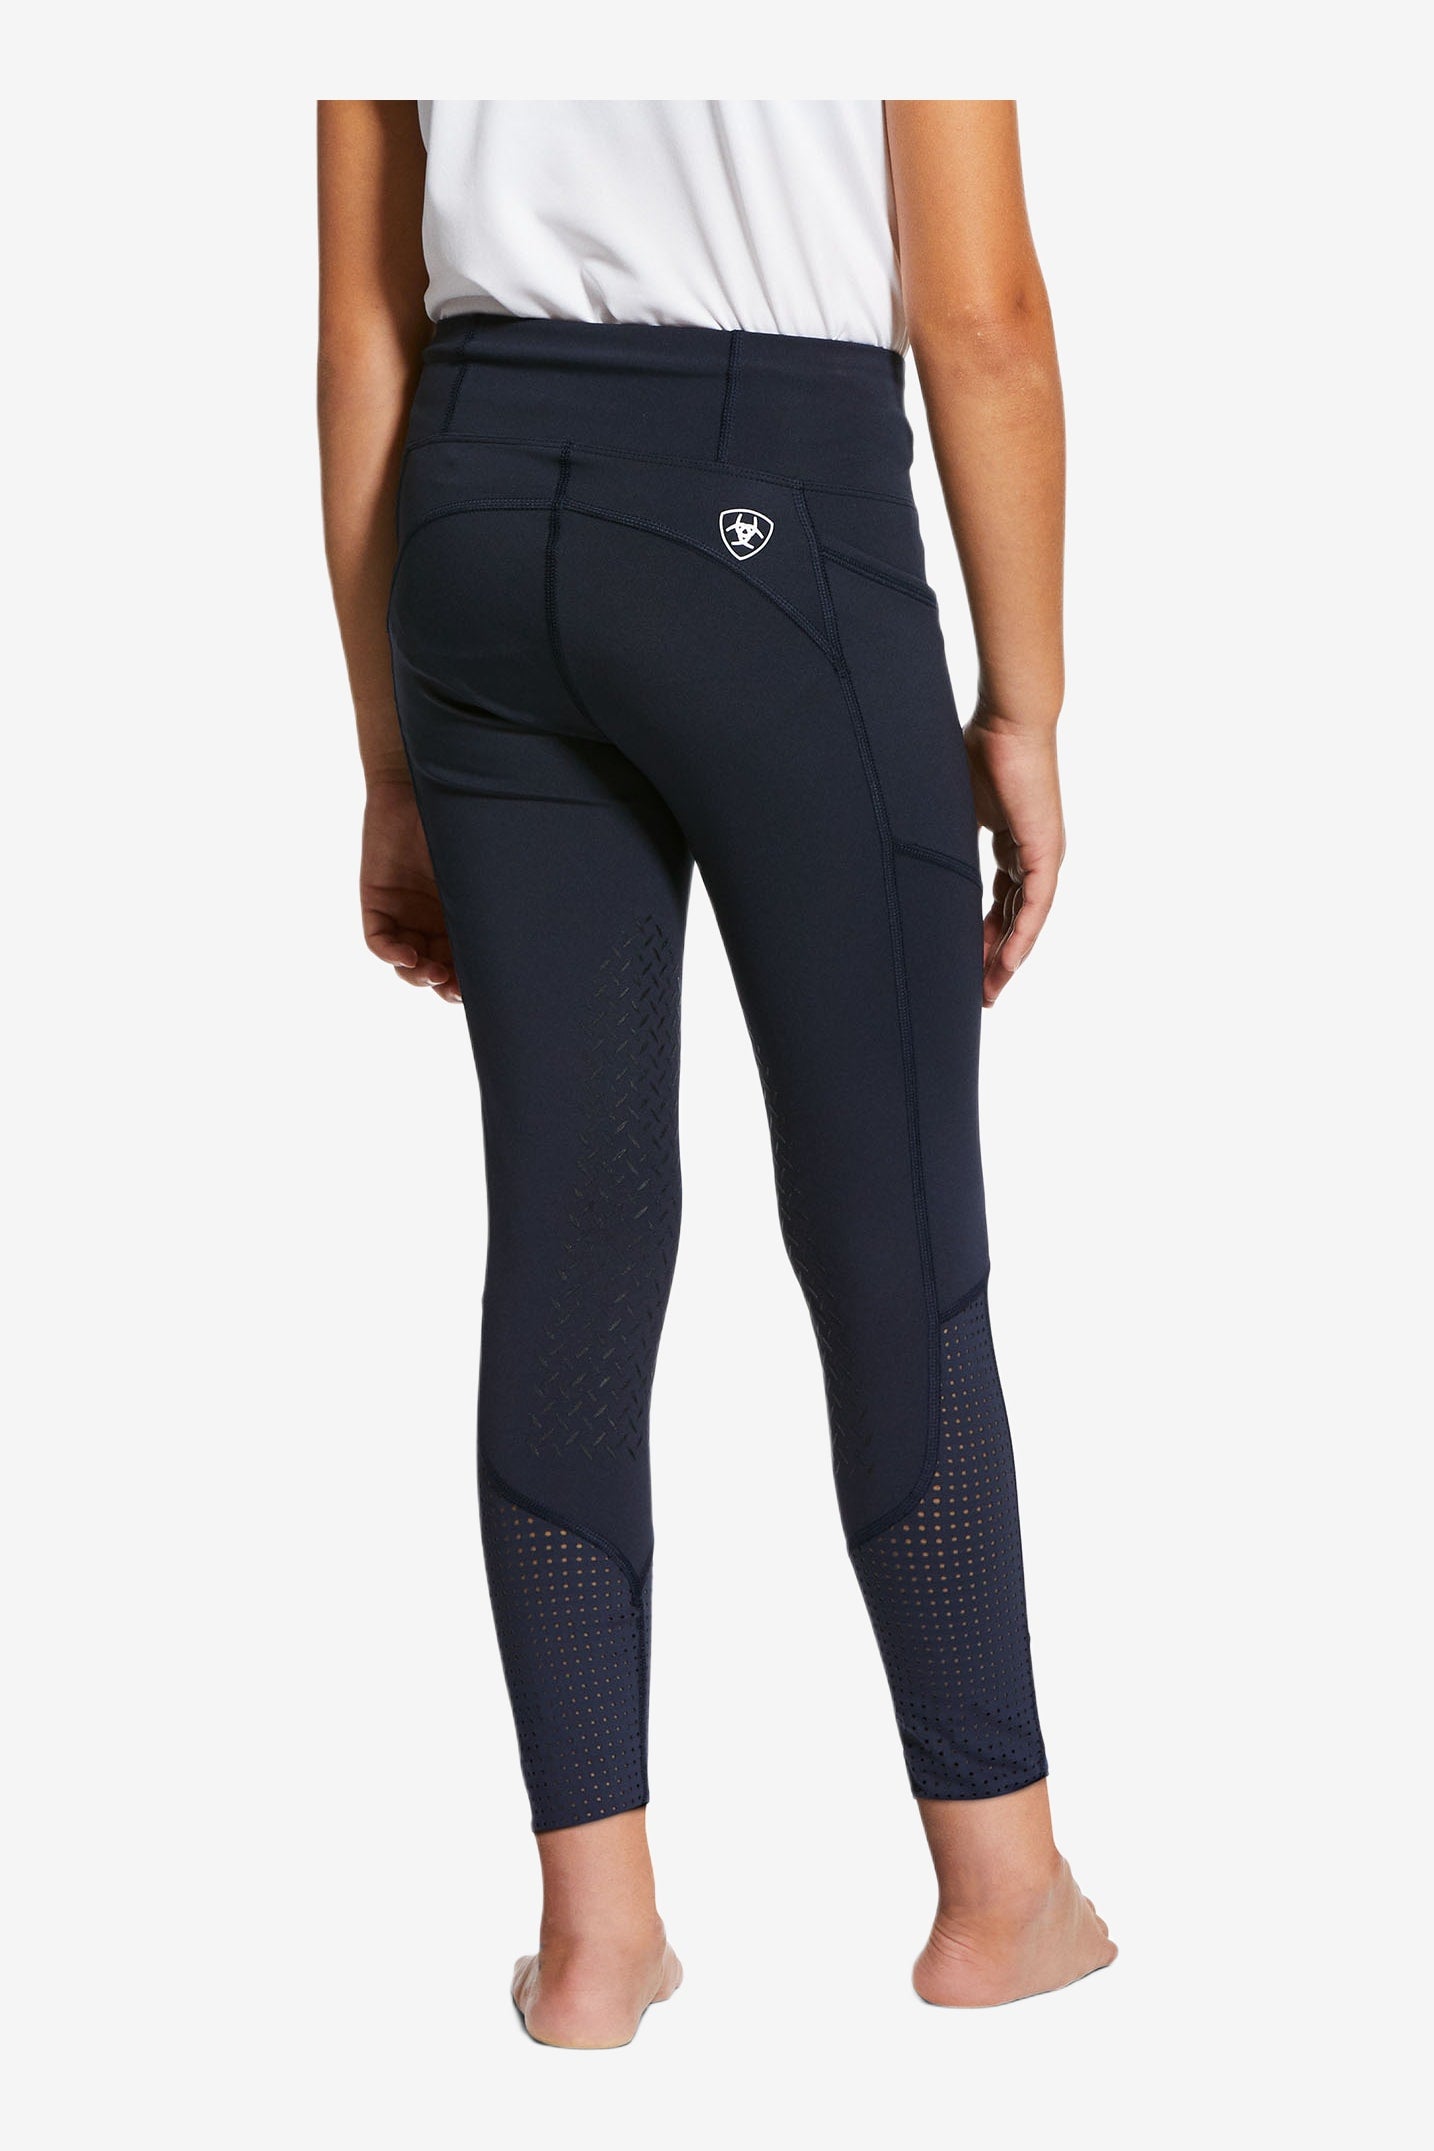 Ariat Women's EOS Full Seat Tights - Beetle/Forest Mist